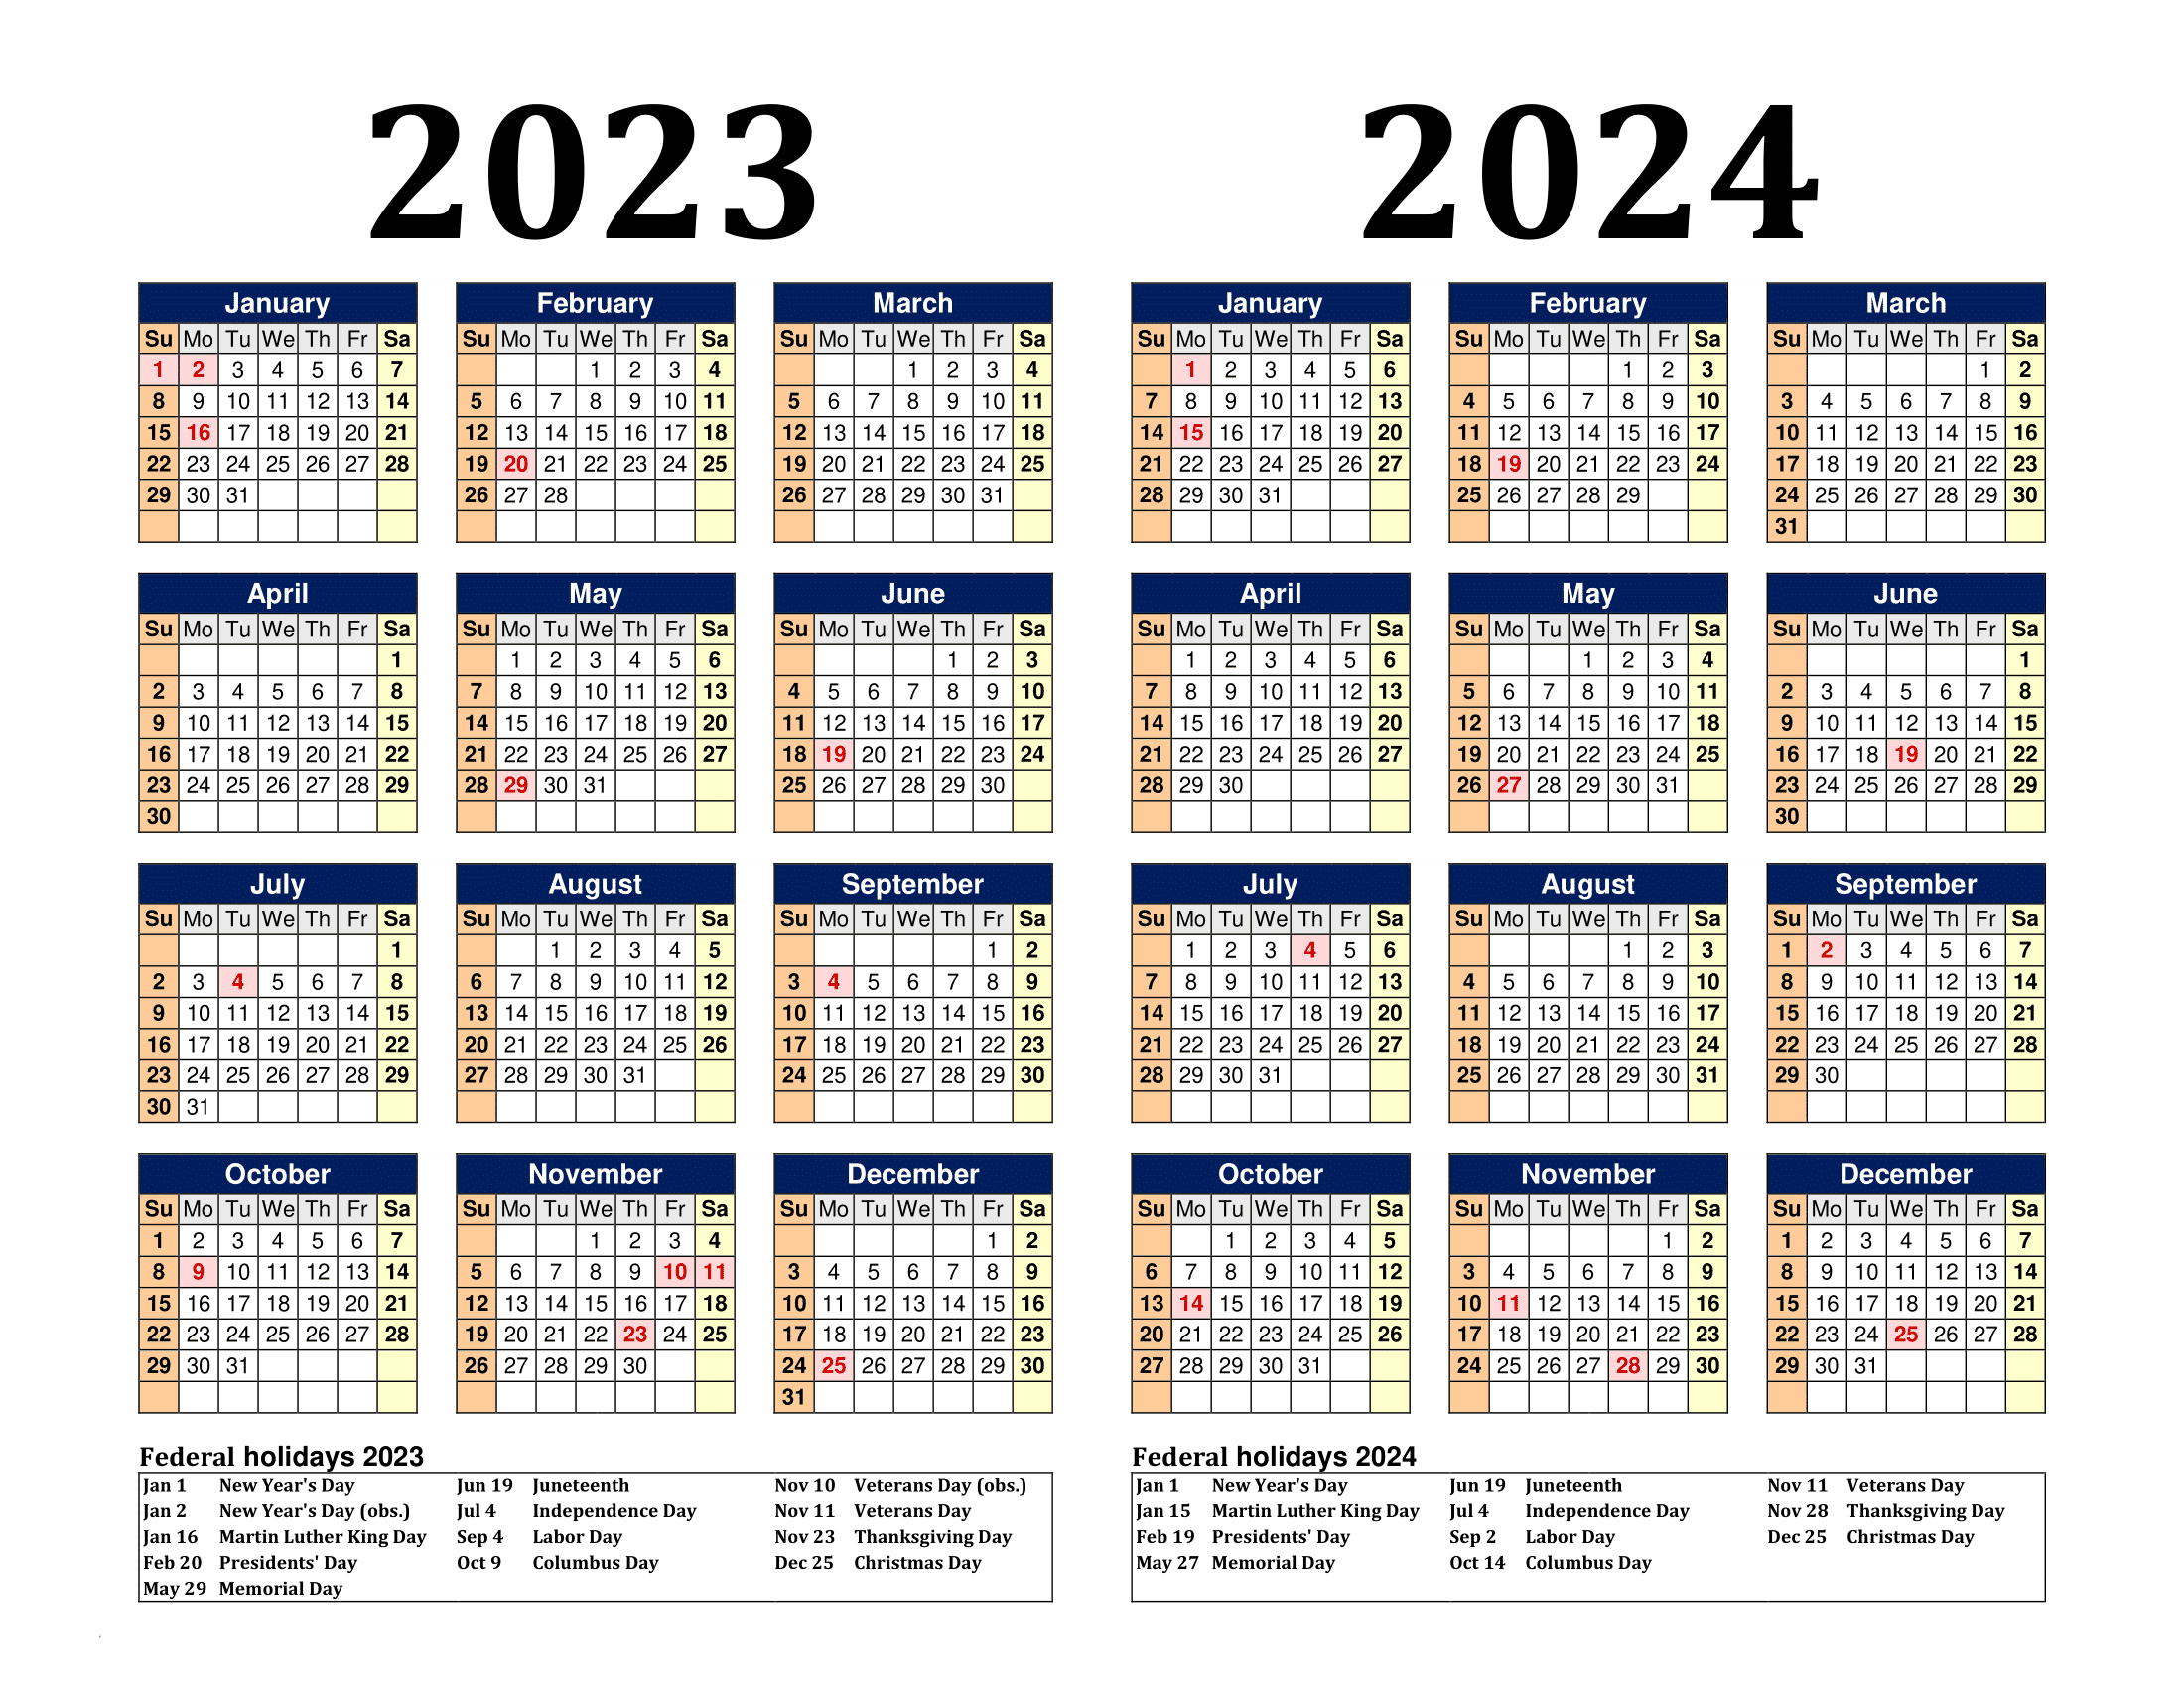 Free Printable Two Year Calendar Templates For 2023 And 2024 In Pdf | 2023 Calendar 2024 Printable Editable